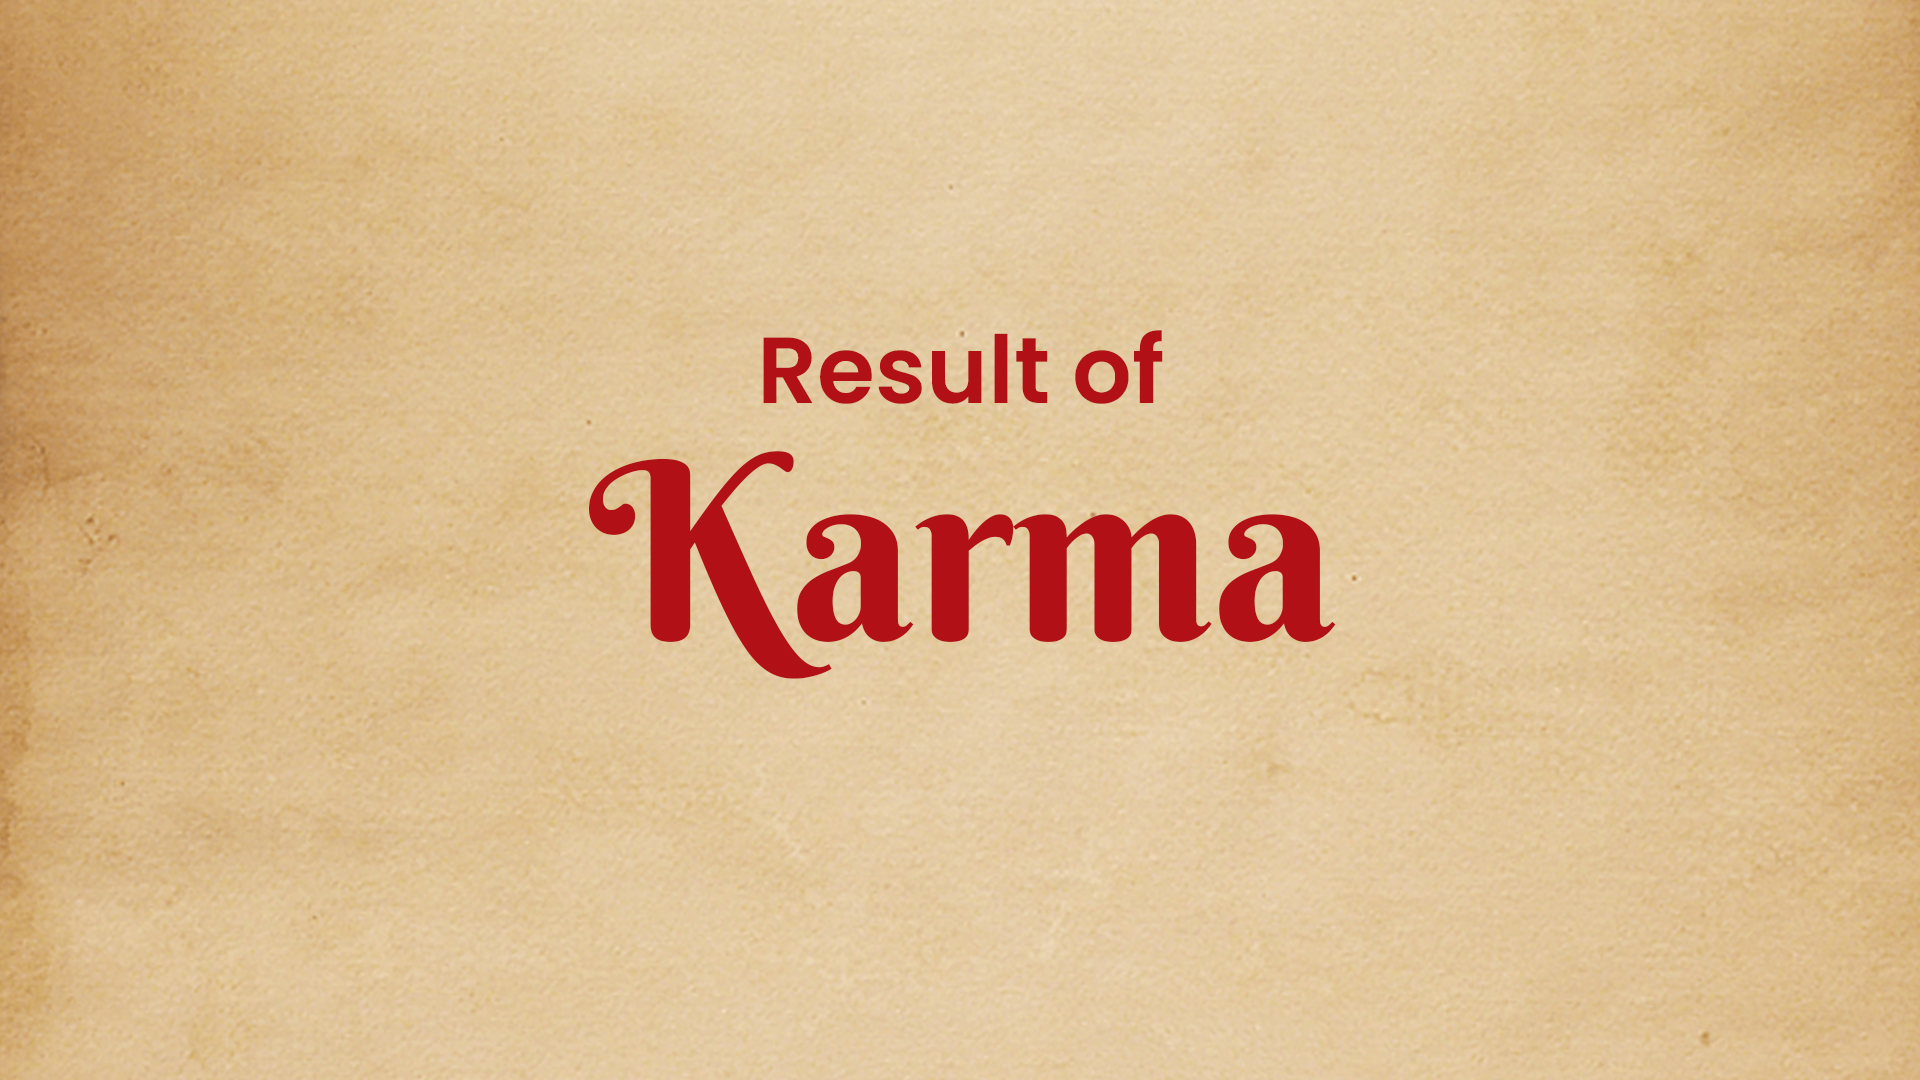 Results of Karma